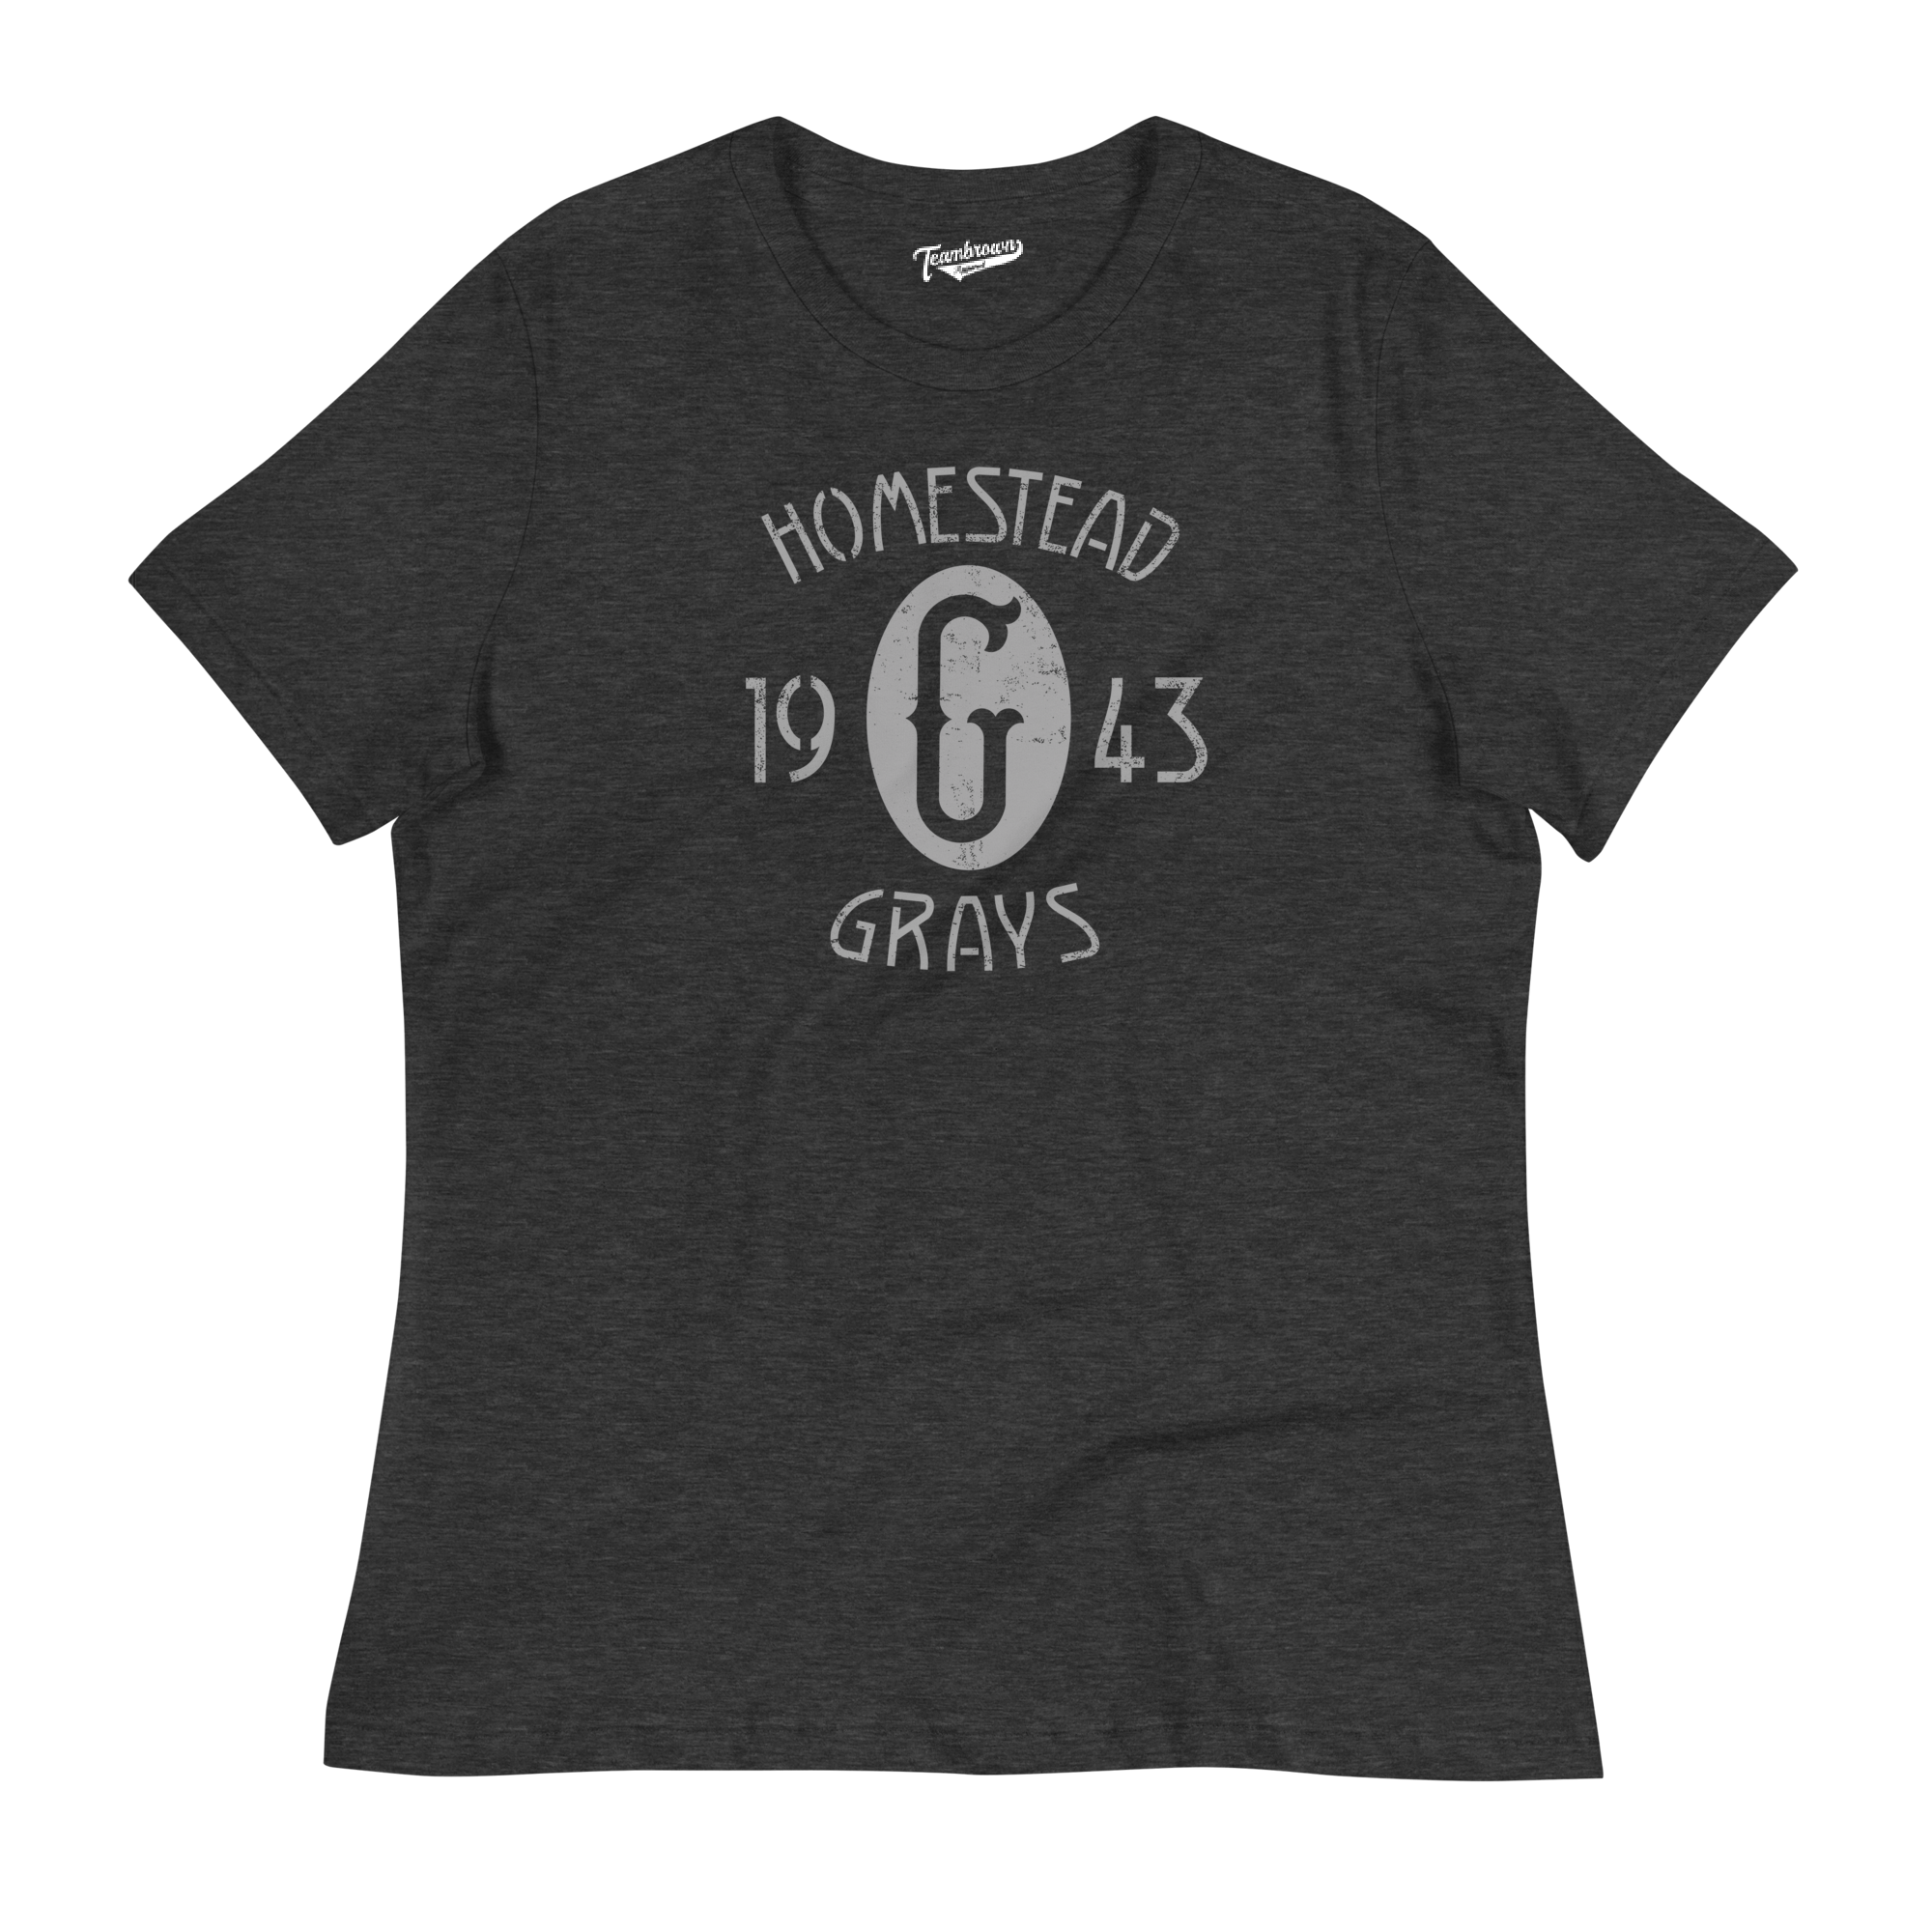 1943 Champions - Homestead Grays - Griffith Park - Women's Relaxed Fit T-Shirt | Officially Licensed - NLBM